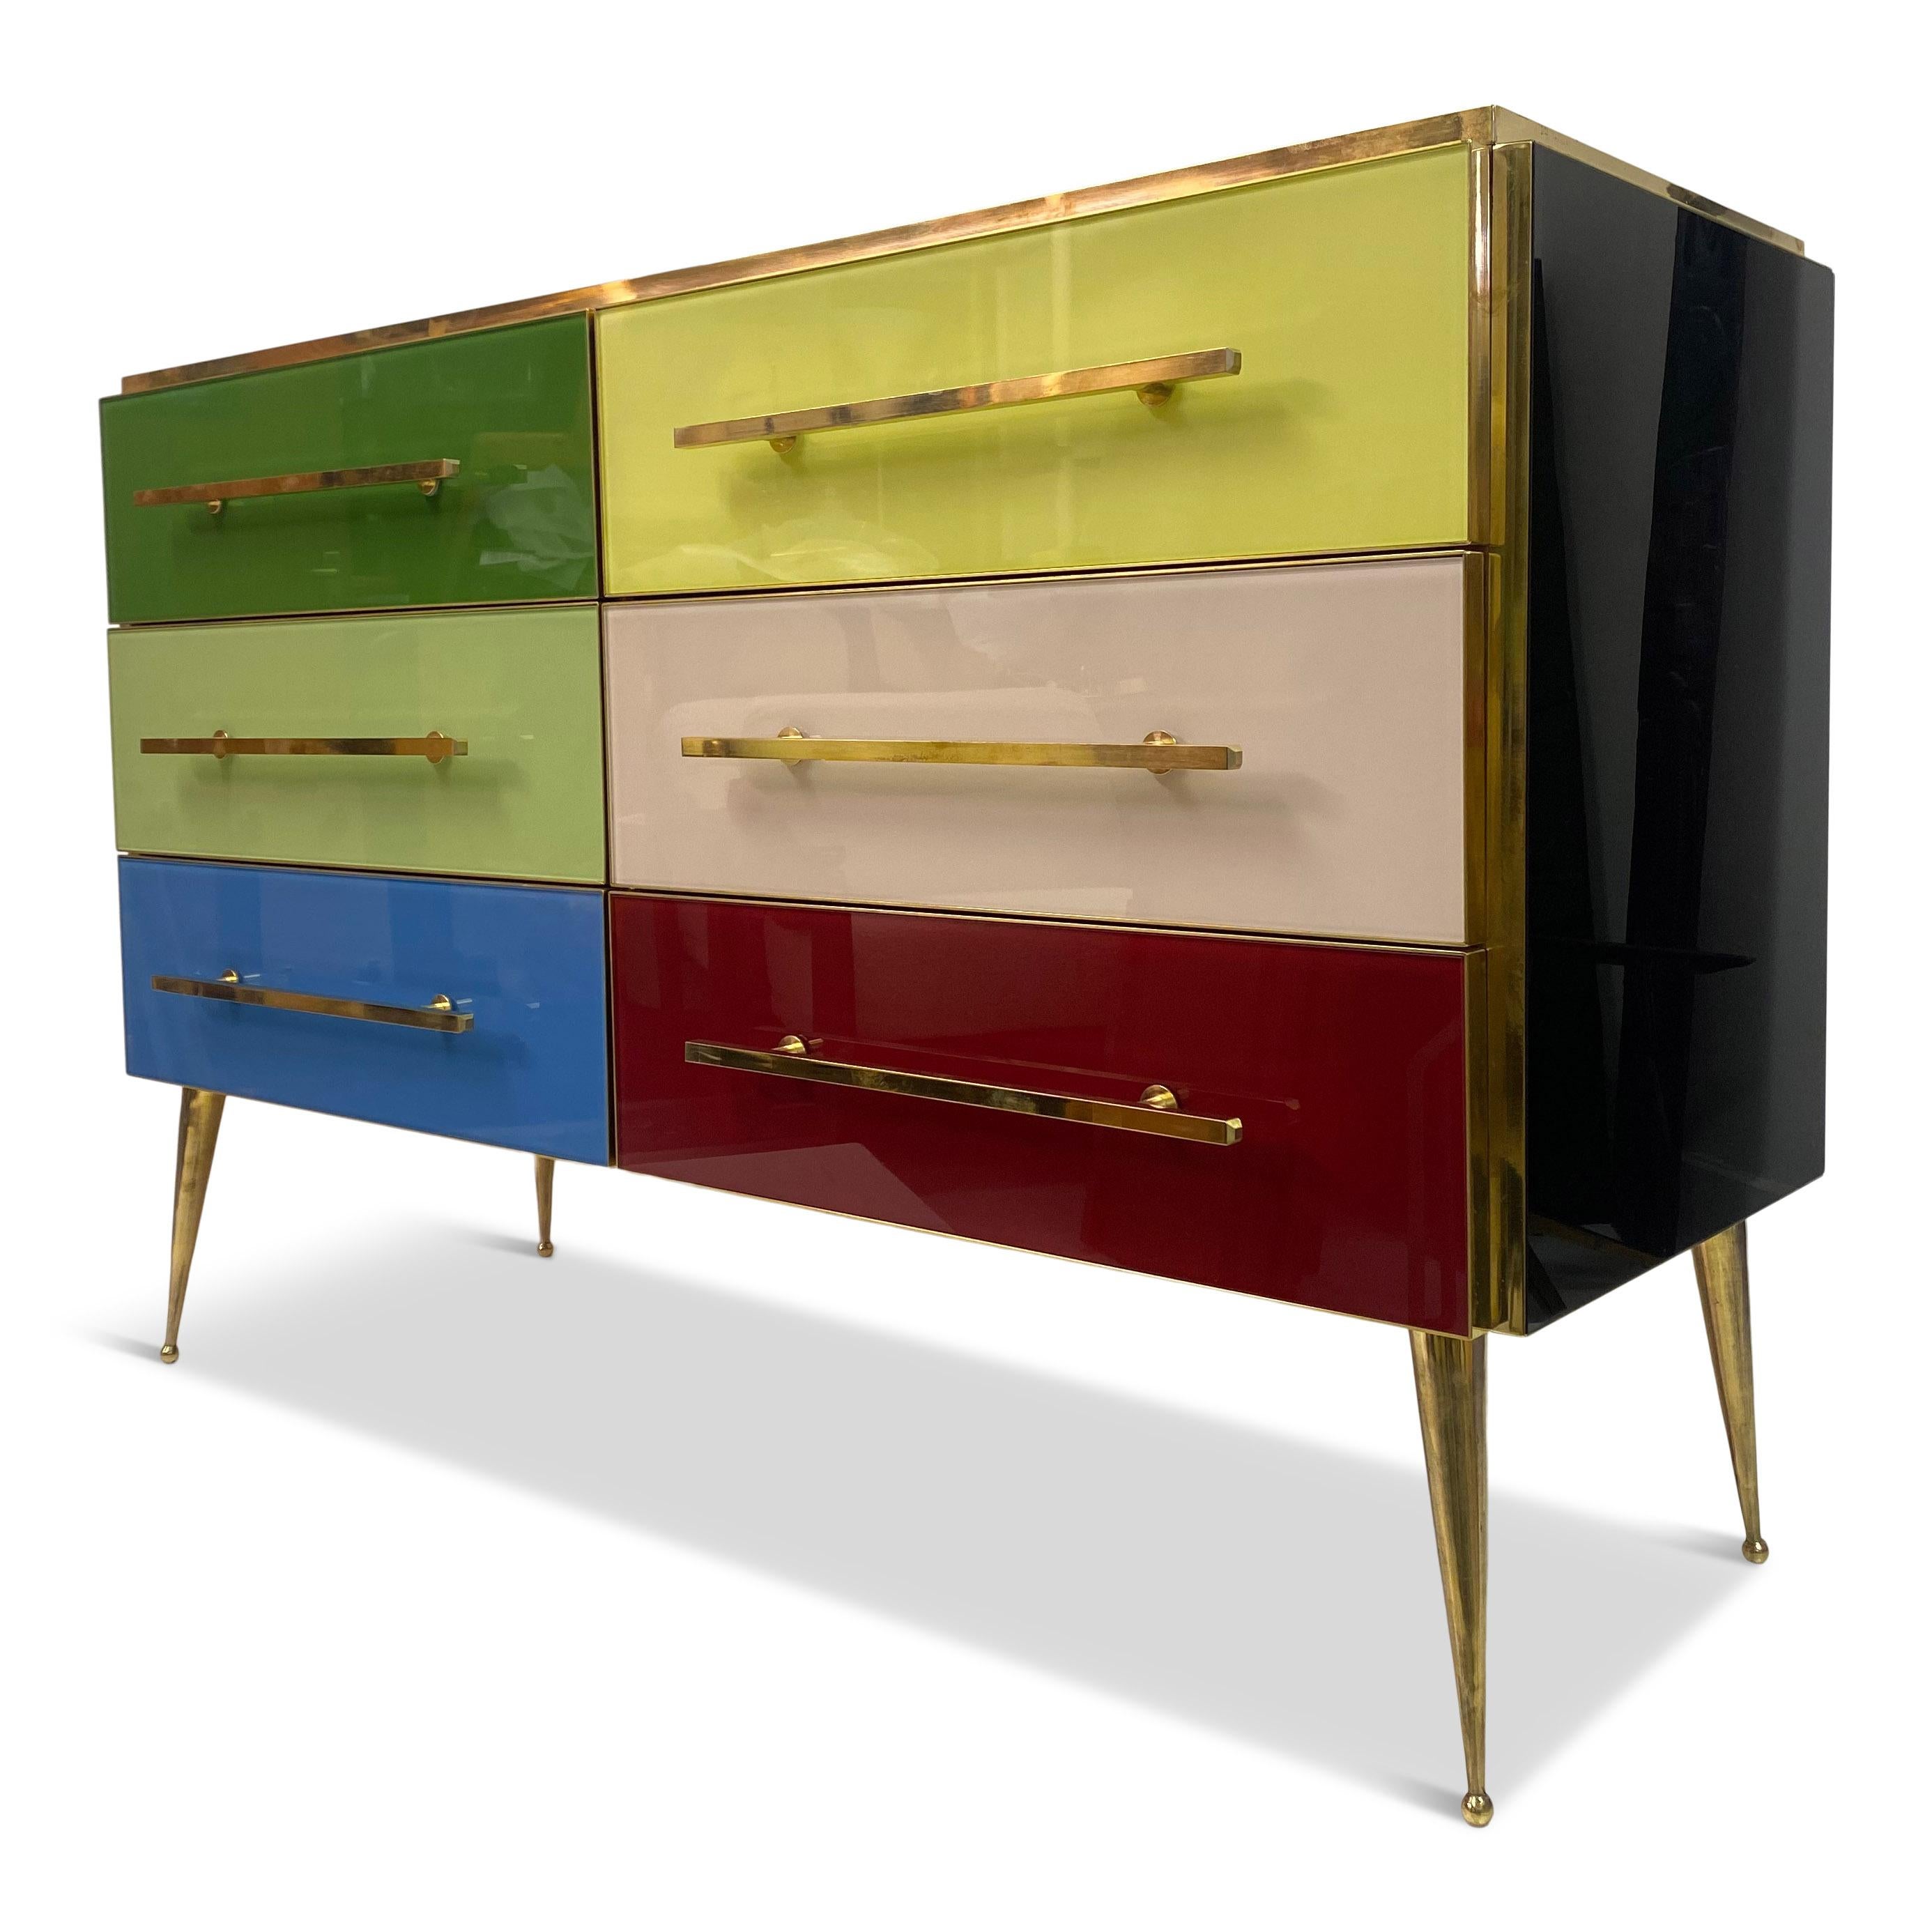 Chest of drawers

Coloured glass drawers

Brass edges

Brass bar handles

Italy Contemporary

Can be made bespoke with different colours or in a sideboard format.